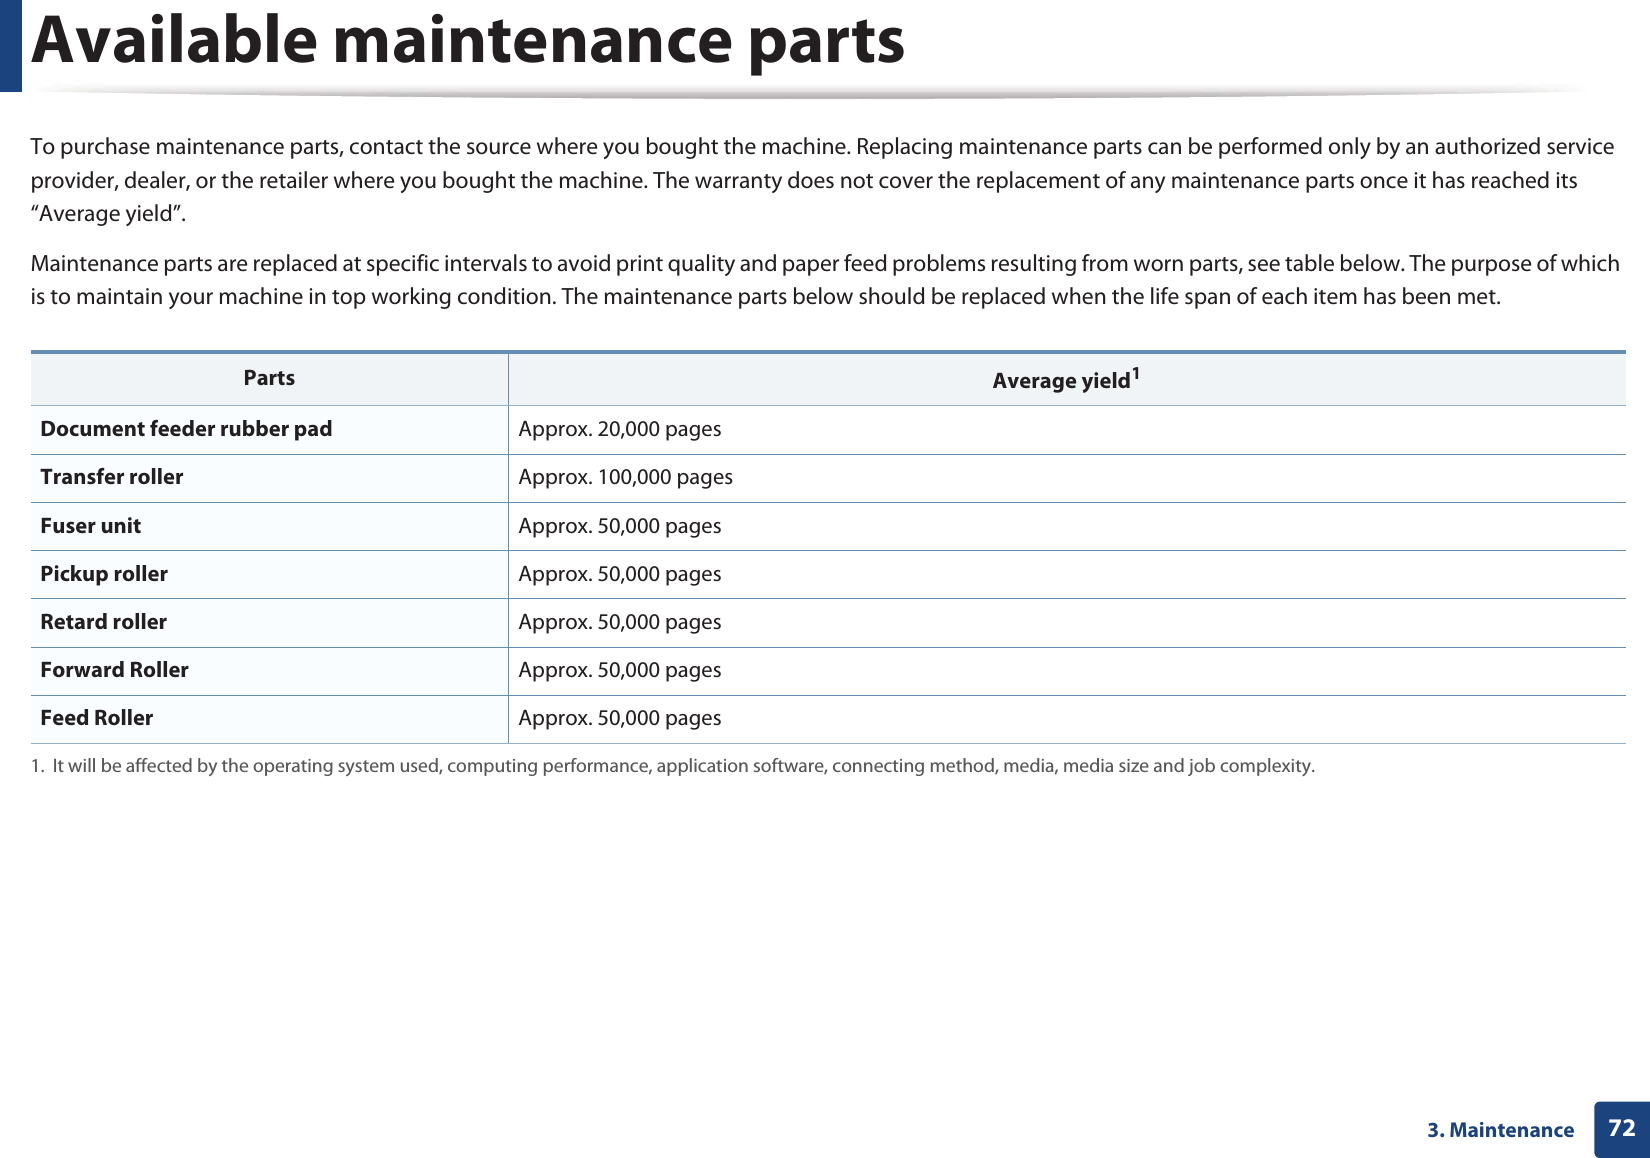 723. MaintenanceAvailable maintenance partsTo purchase maintenance parts, contact the source where you bought the machine. Replacing maintenance parts can be performed only by an authorized service provider, dealer, or the retailer where you bought the machine. The warranty does not cover the replacement of any maintenance parts once it has reached its “Average yield”.Maintenance parts are replaced at specific intervals to avoid print quality and paper feed problems resulting from worn parts, see table below. The purpose of which is to maintain your machine in top working condition. The maintenance parts below should be replaced when the life span of each item has been met.Parts Average yield11. It will be affected by the operating system used, computing performance, application software, connecting method, media, media size and job complexity.Document feeder rubber pad Approx. 20,000 pagesTransfer roller Approx. 100,000 pages Fuser unit Approx. 50,000 pagesPickup roller Approx. 50,000 pagesRetard roller Approx. 50,000 pagesForward Roller Approx. 50,000 pagesFeed Roller Approx. 50,000 pages